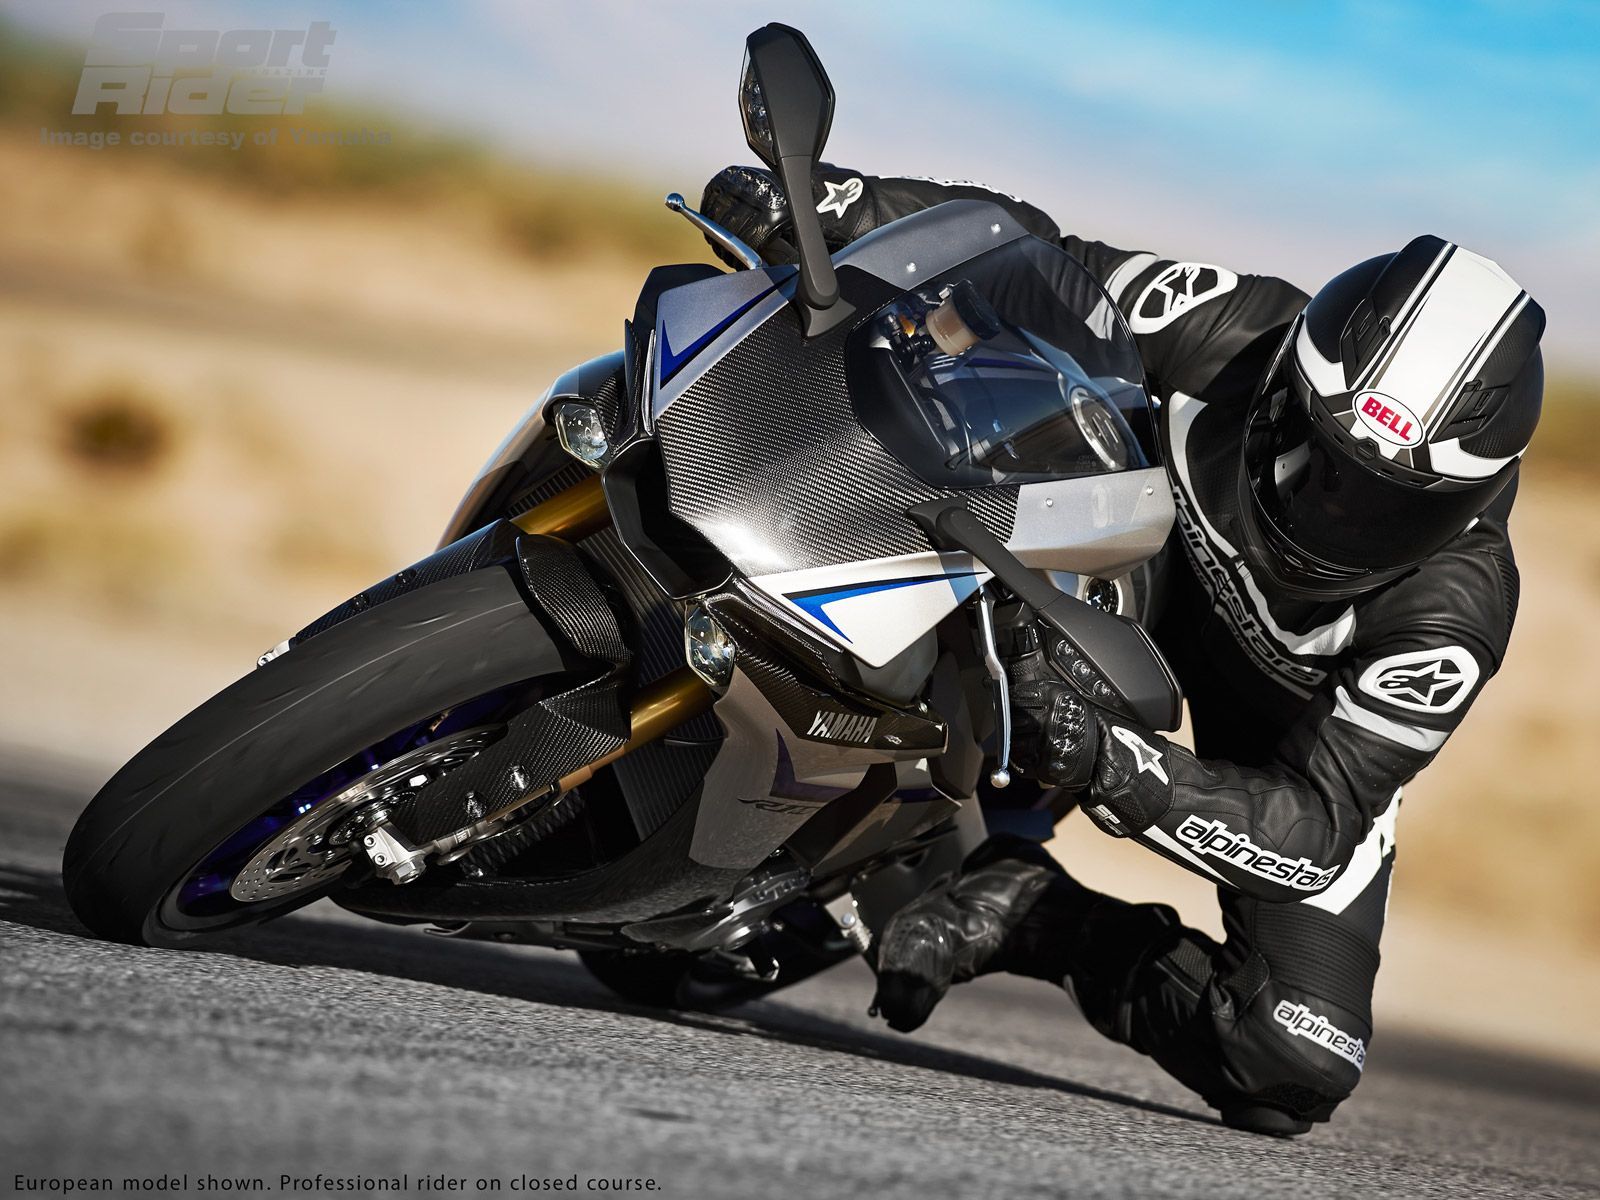 Image Gallery: The 2015 Yamaha YZF-R1 and R1M in Action | Sport Rider